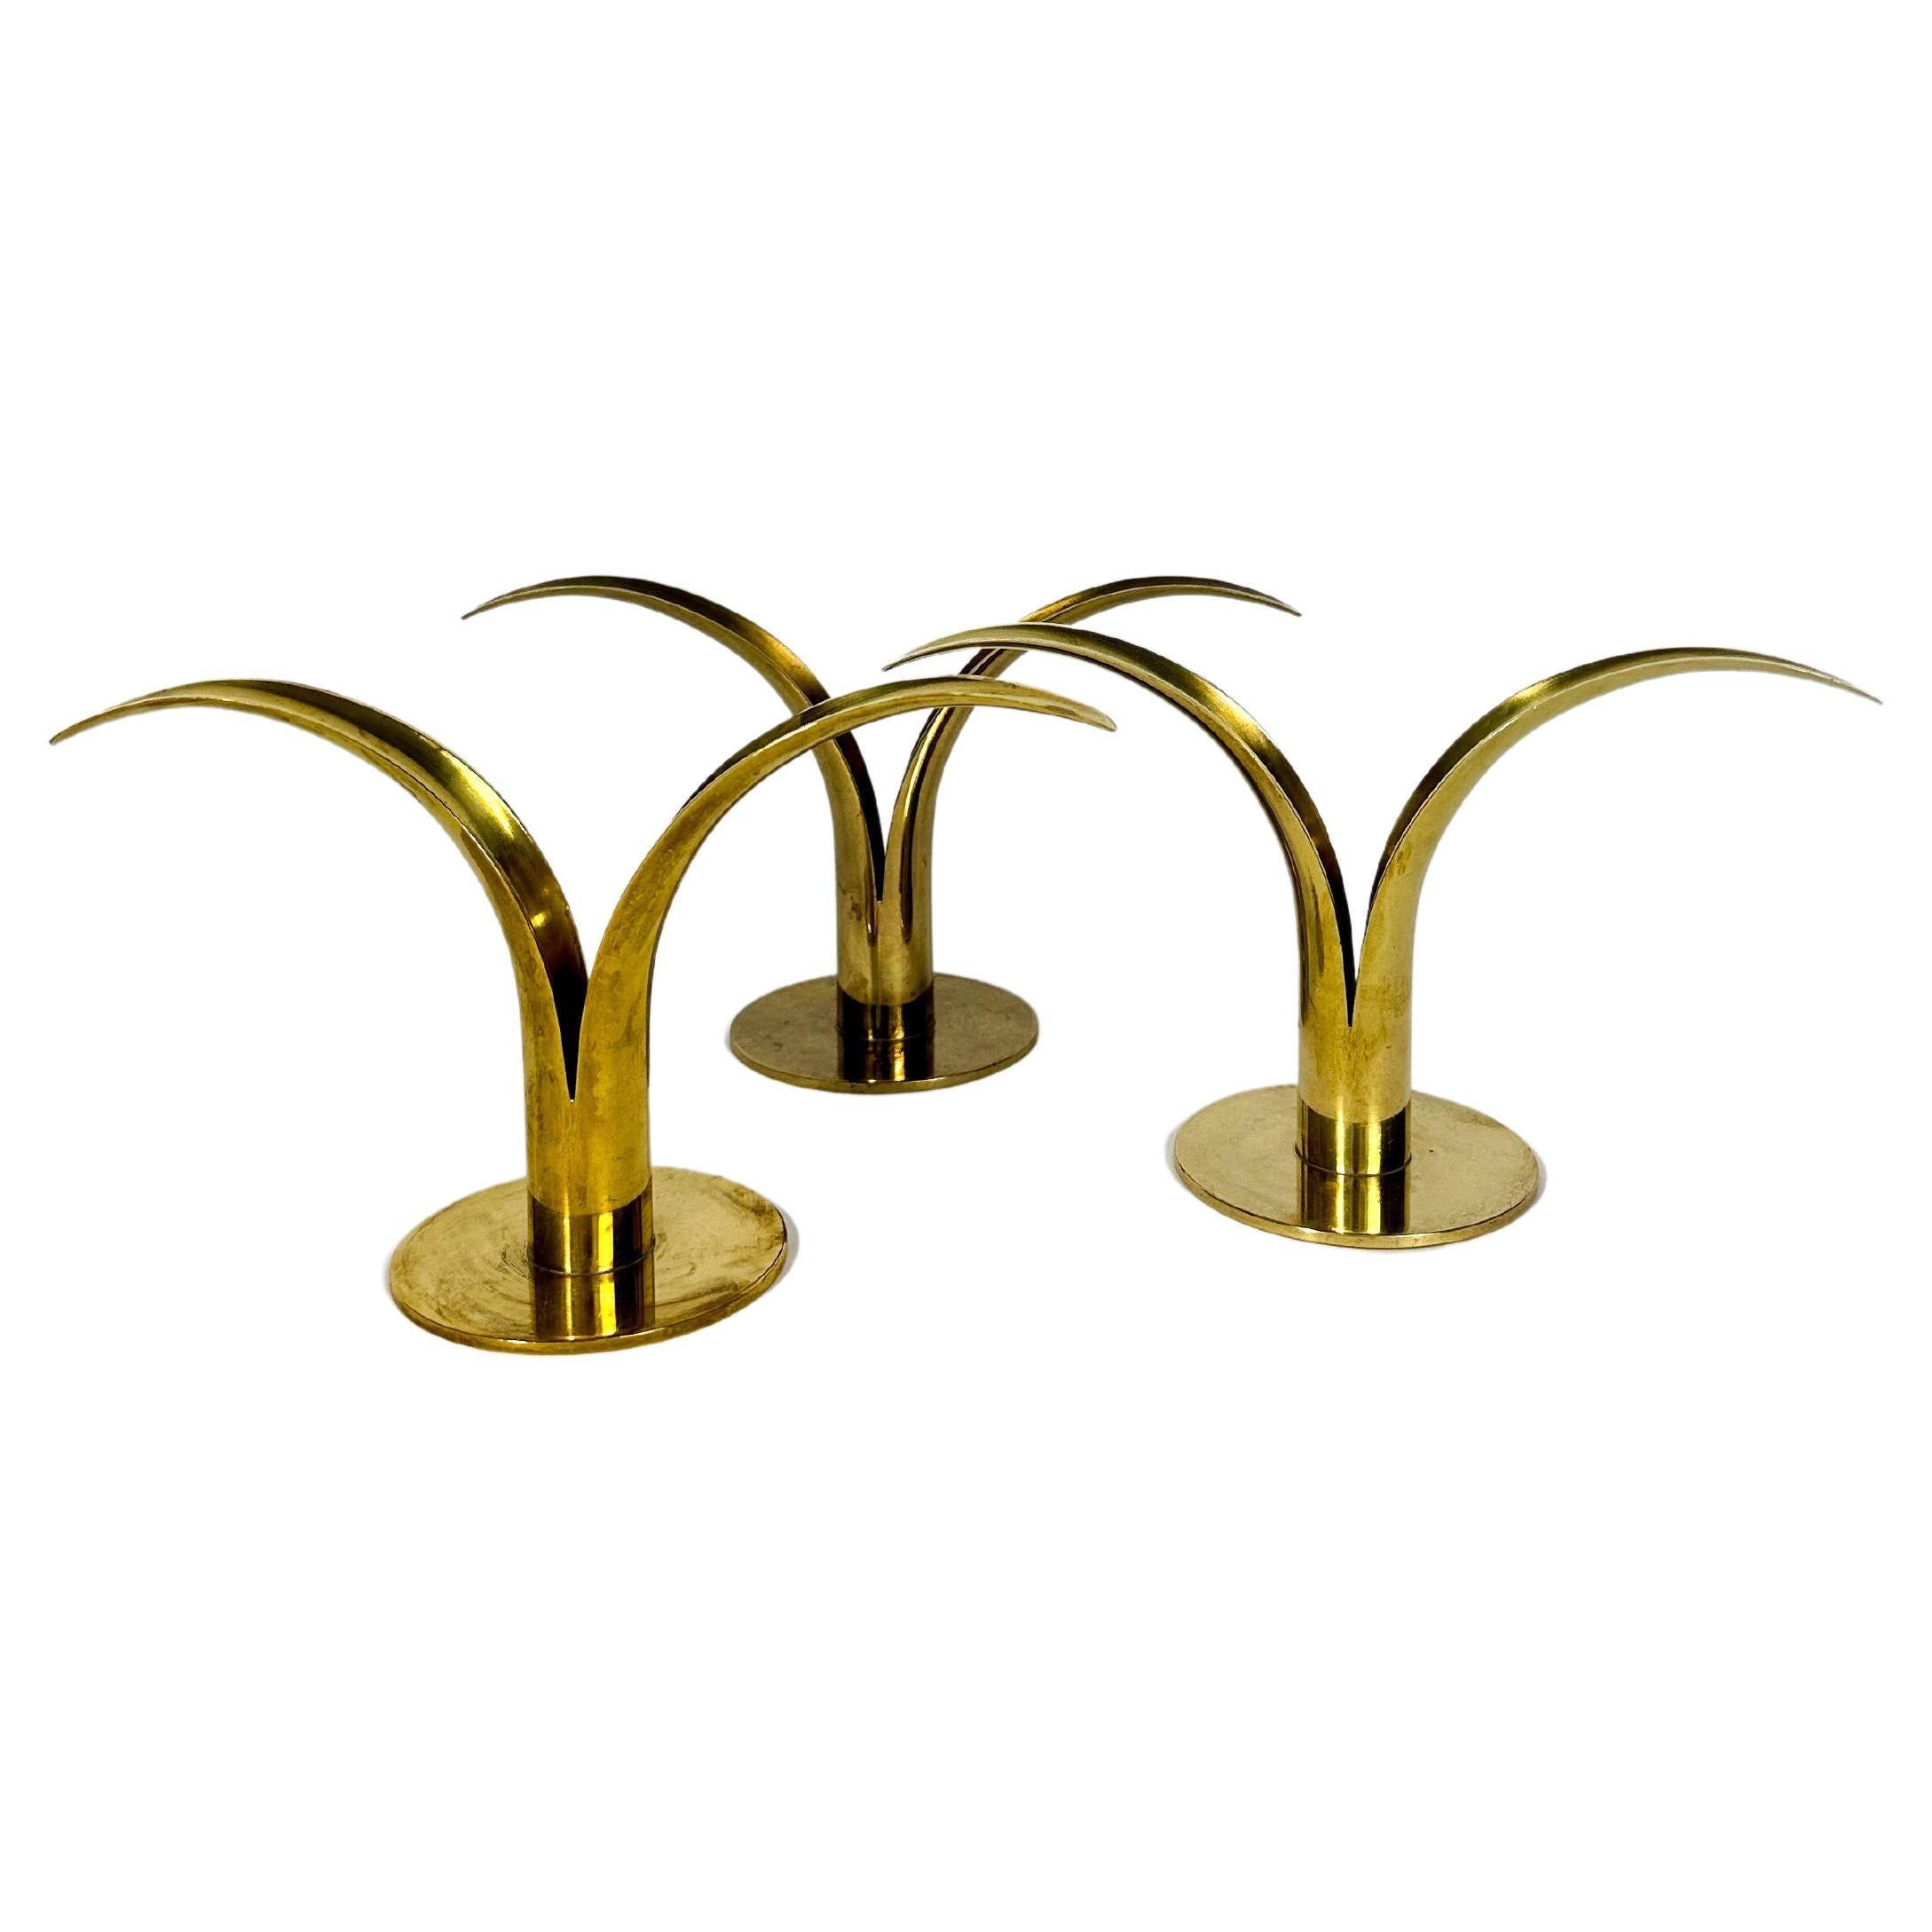 Ivar Ålenius-Björk Lily candle holder (Liljan), designed in 1939 for the Scandinavian Pavillon of the 1939 New York World‘s Fair.

The Lily candle sticks were originally produced by Ystad-Metall in Sweden, all marked with the Ystad-Metall stamp